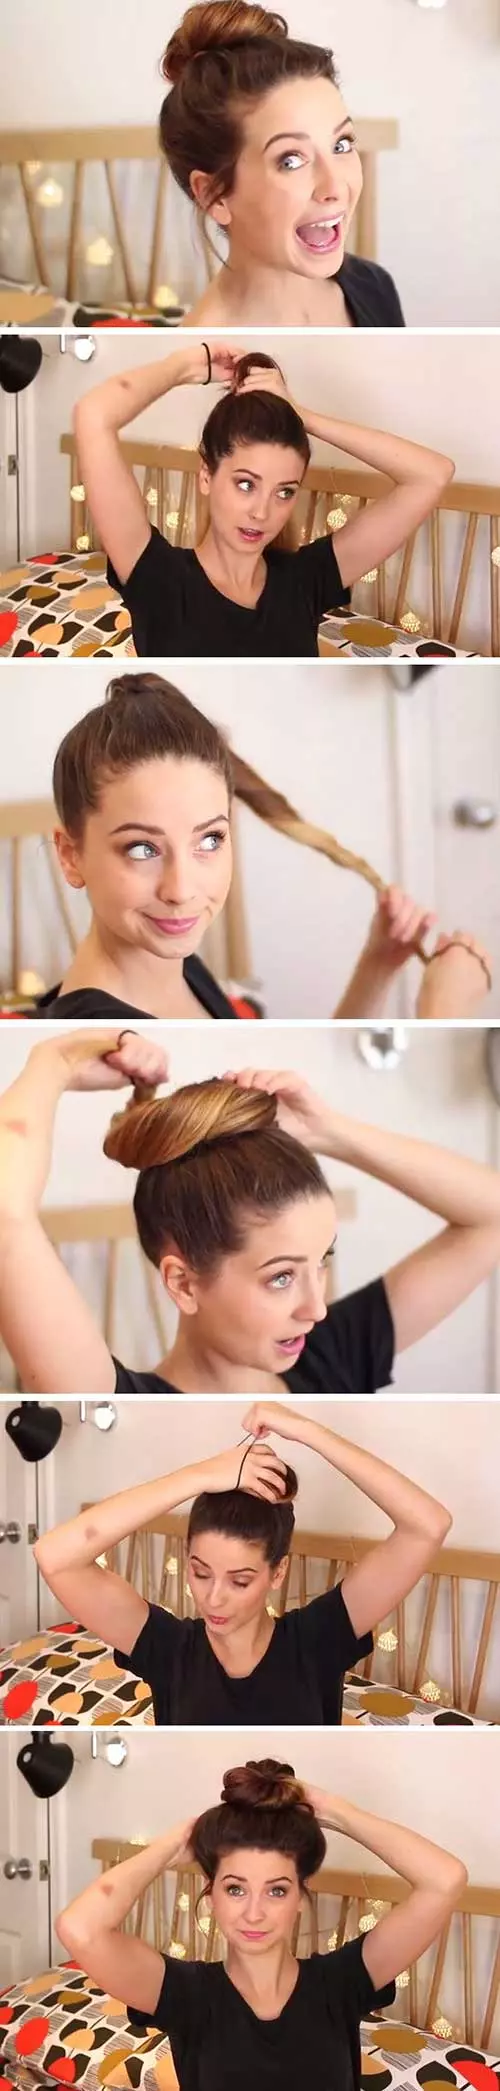 Messy bun hairstyle for school